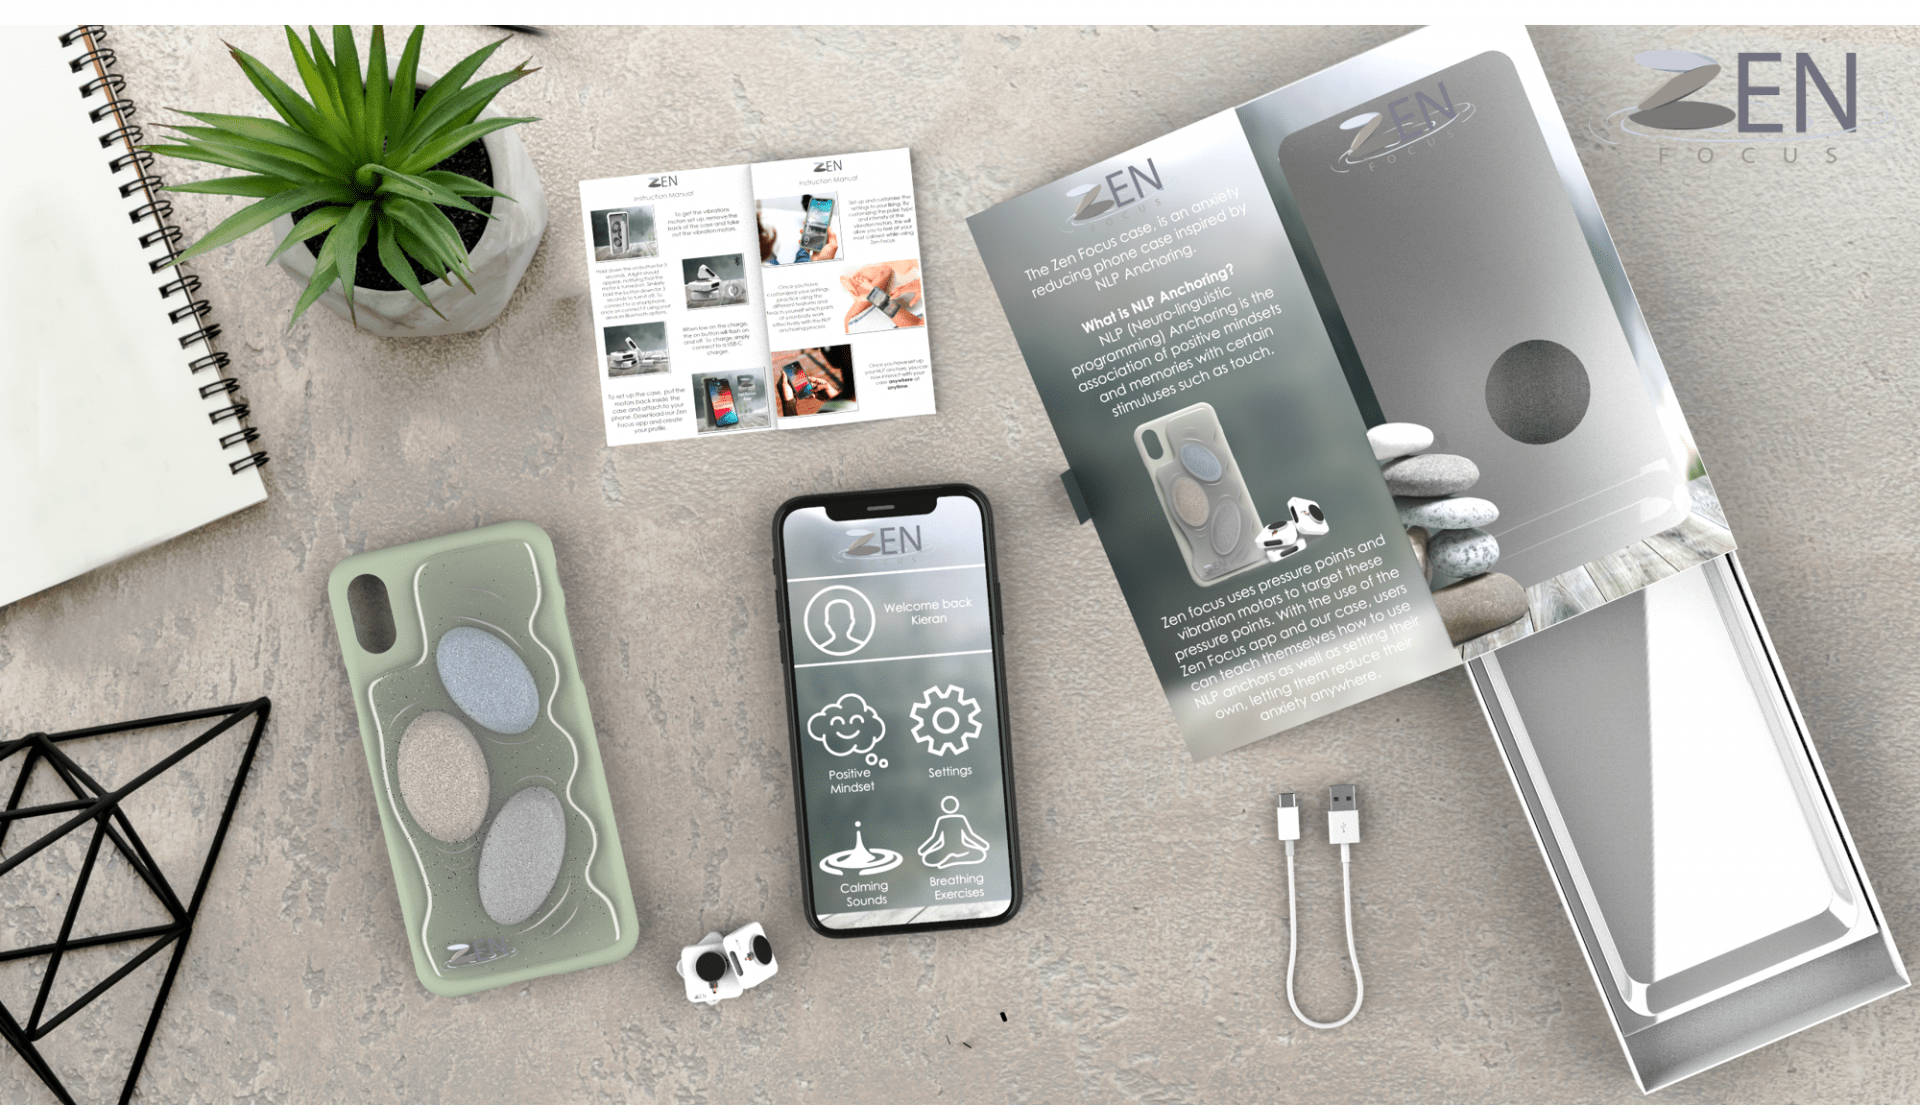 Flatlay showing all that is included when you buy a Zen Focus phone case, including a phone, case, booklet, app, box and cable. 